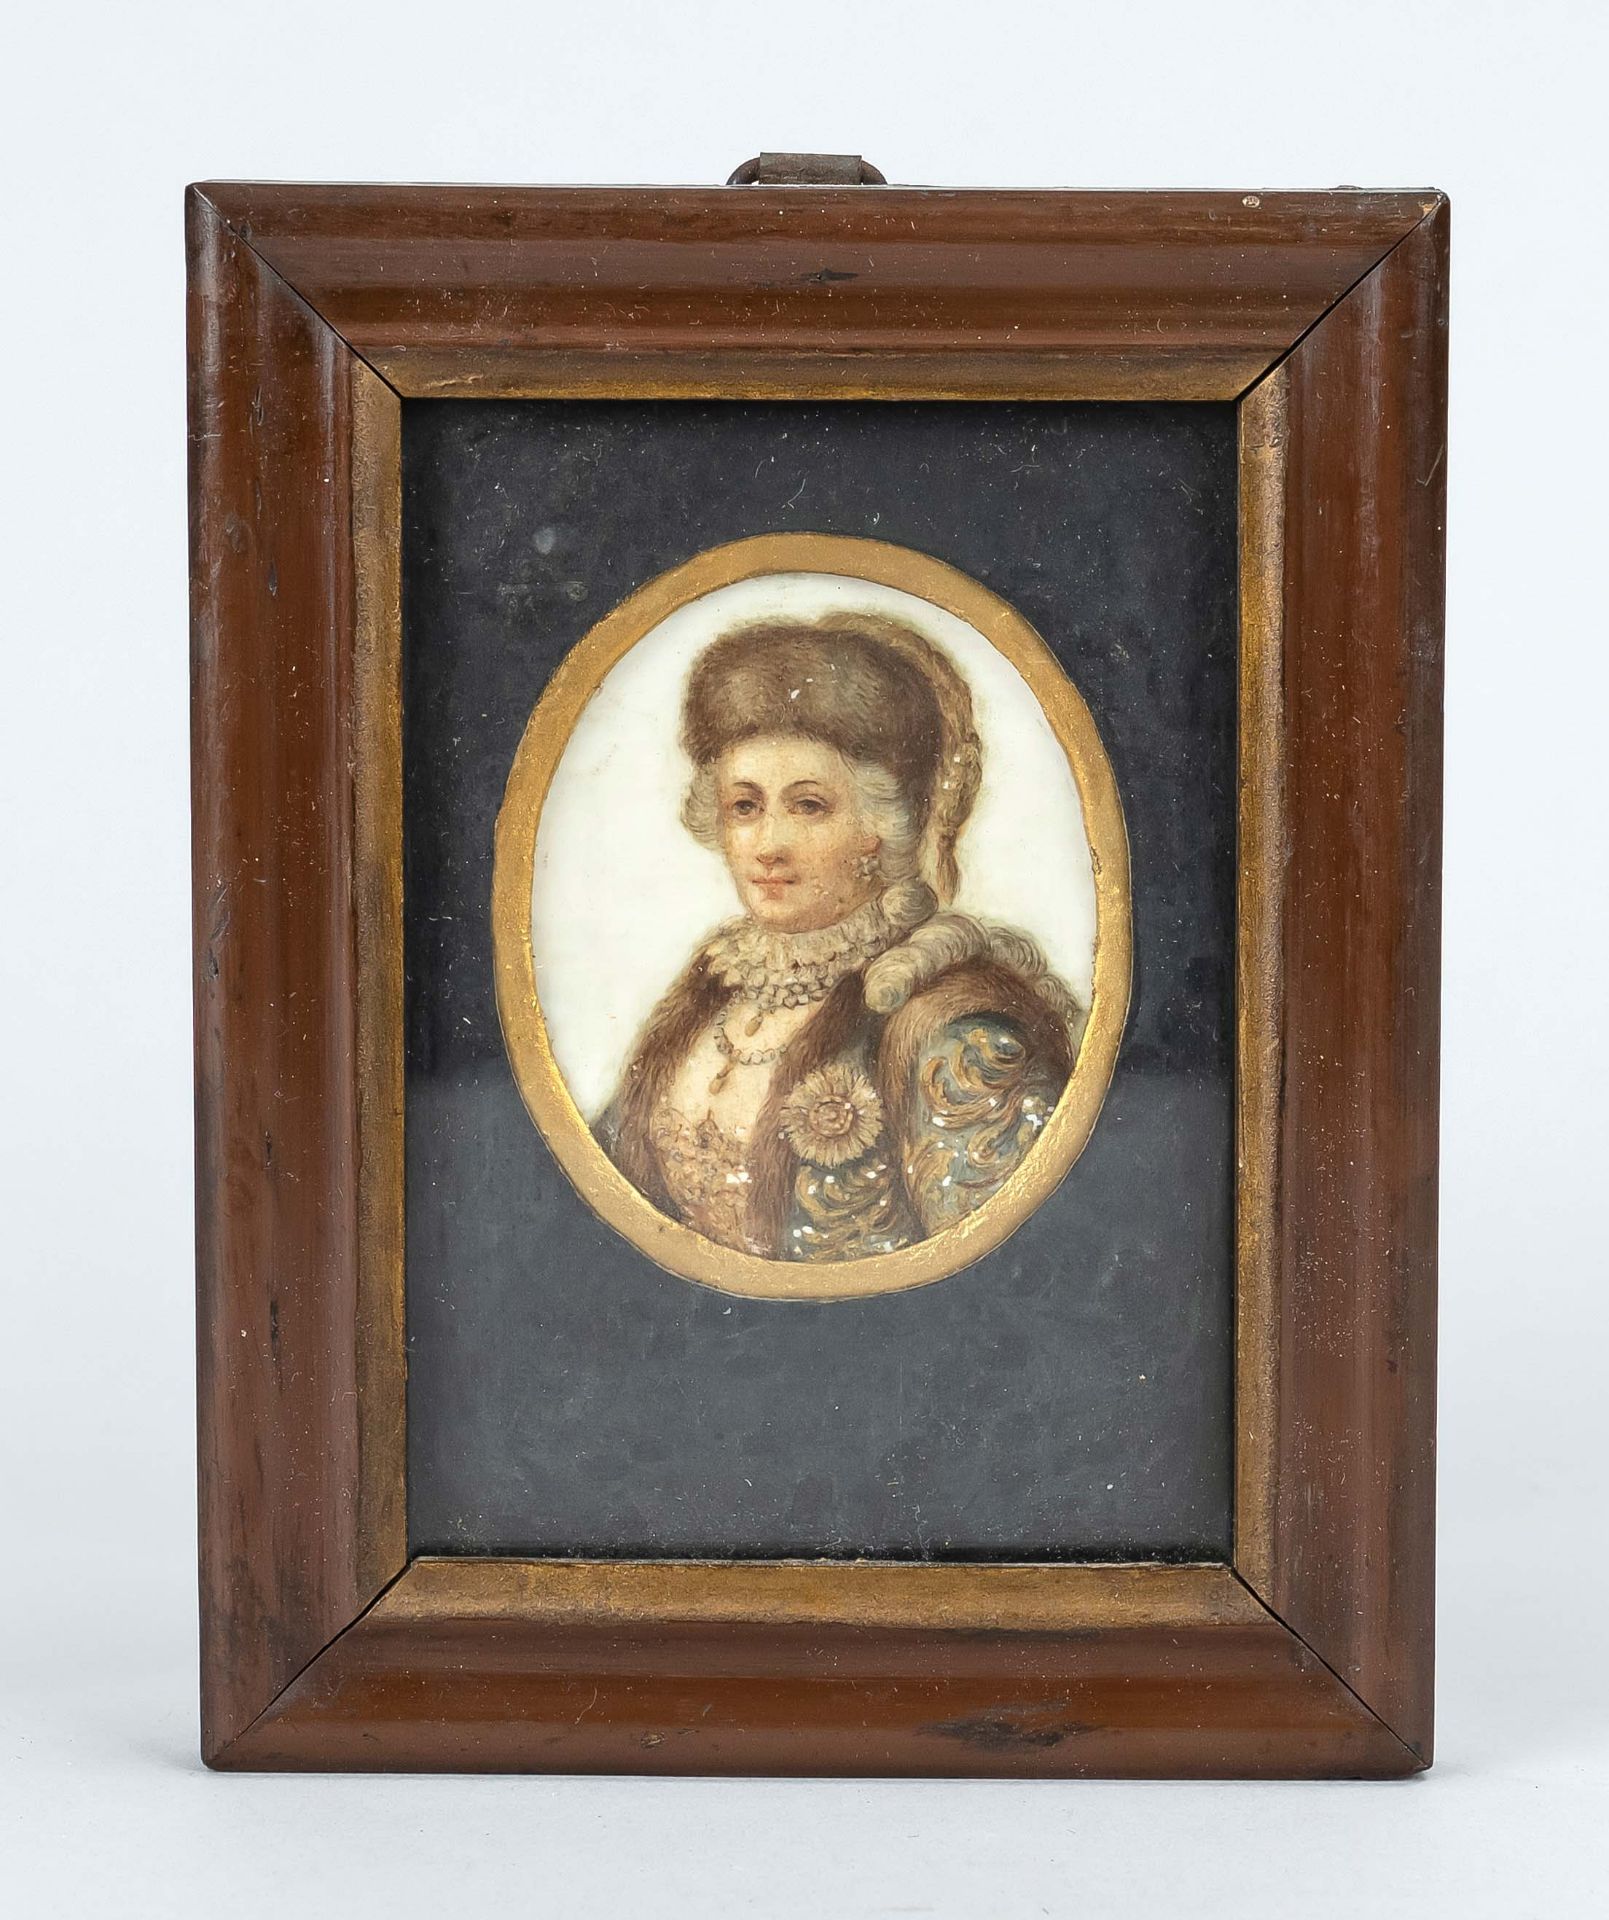 Miniature, probably 19th c., portrait of a lady in fur, polychrome on leg plate. Framed behind glass